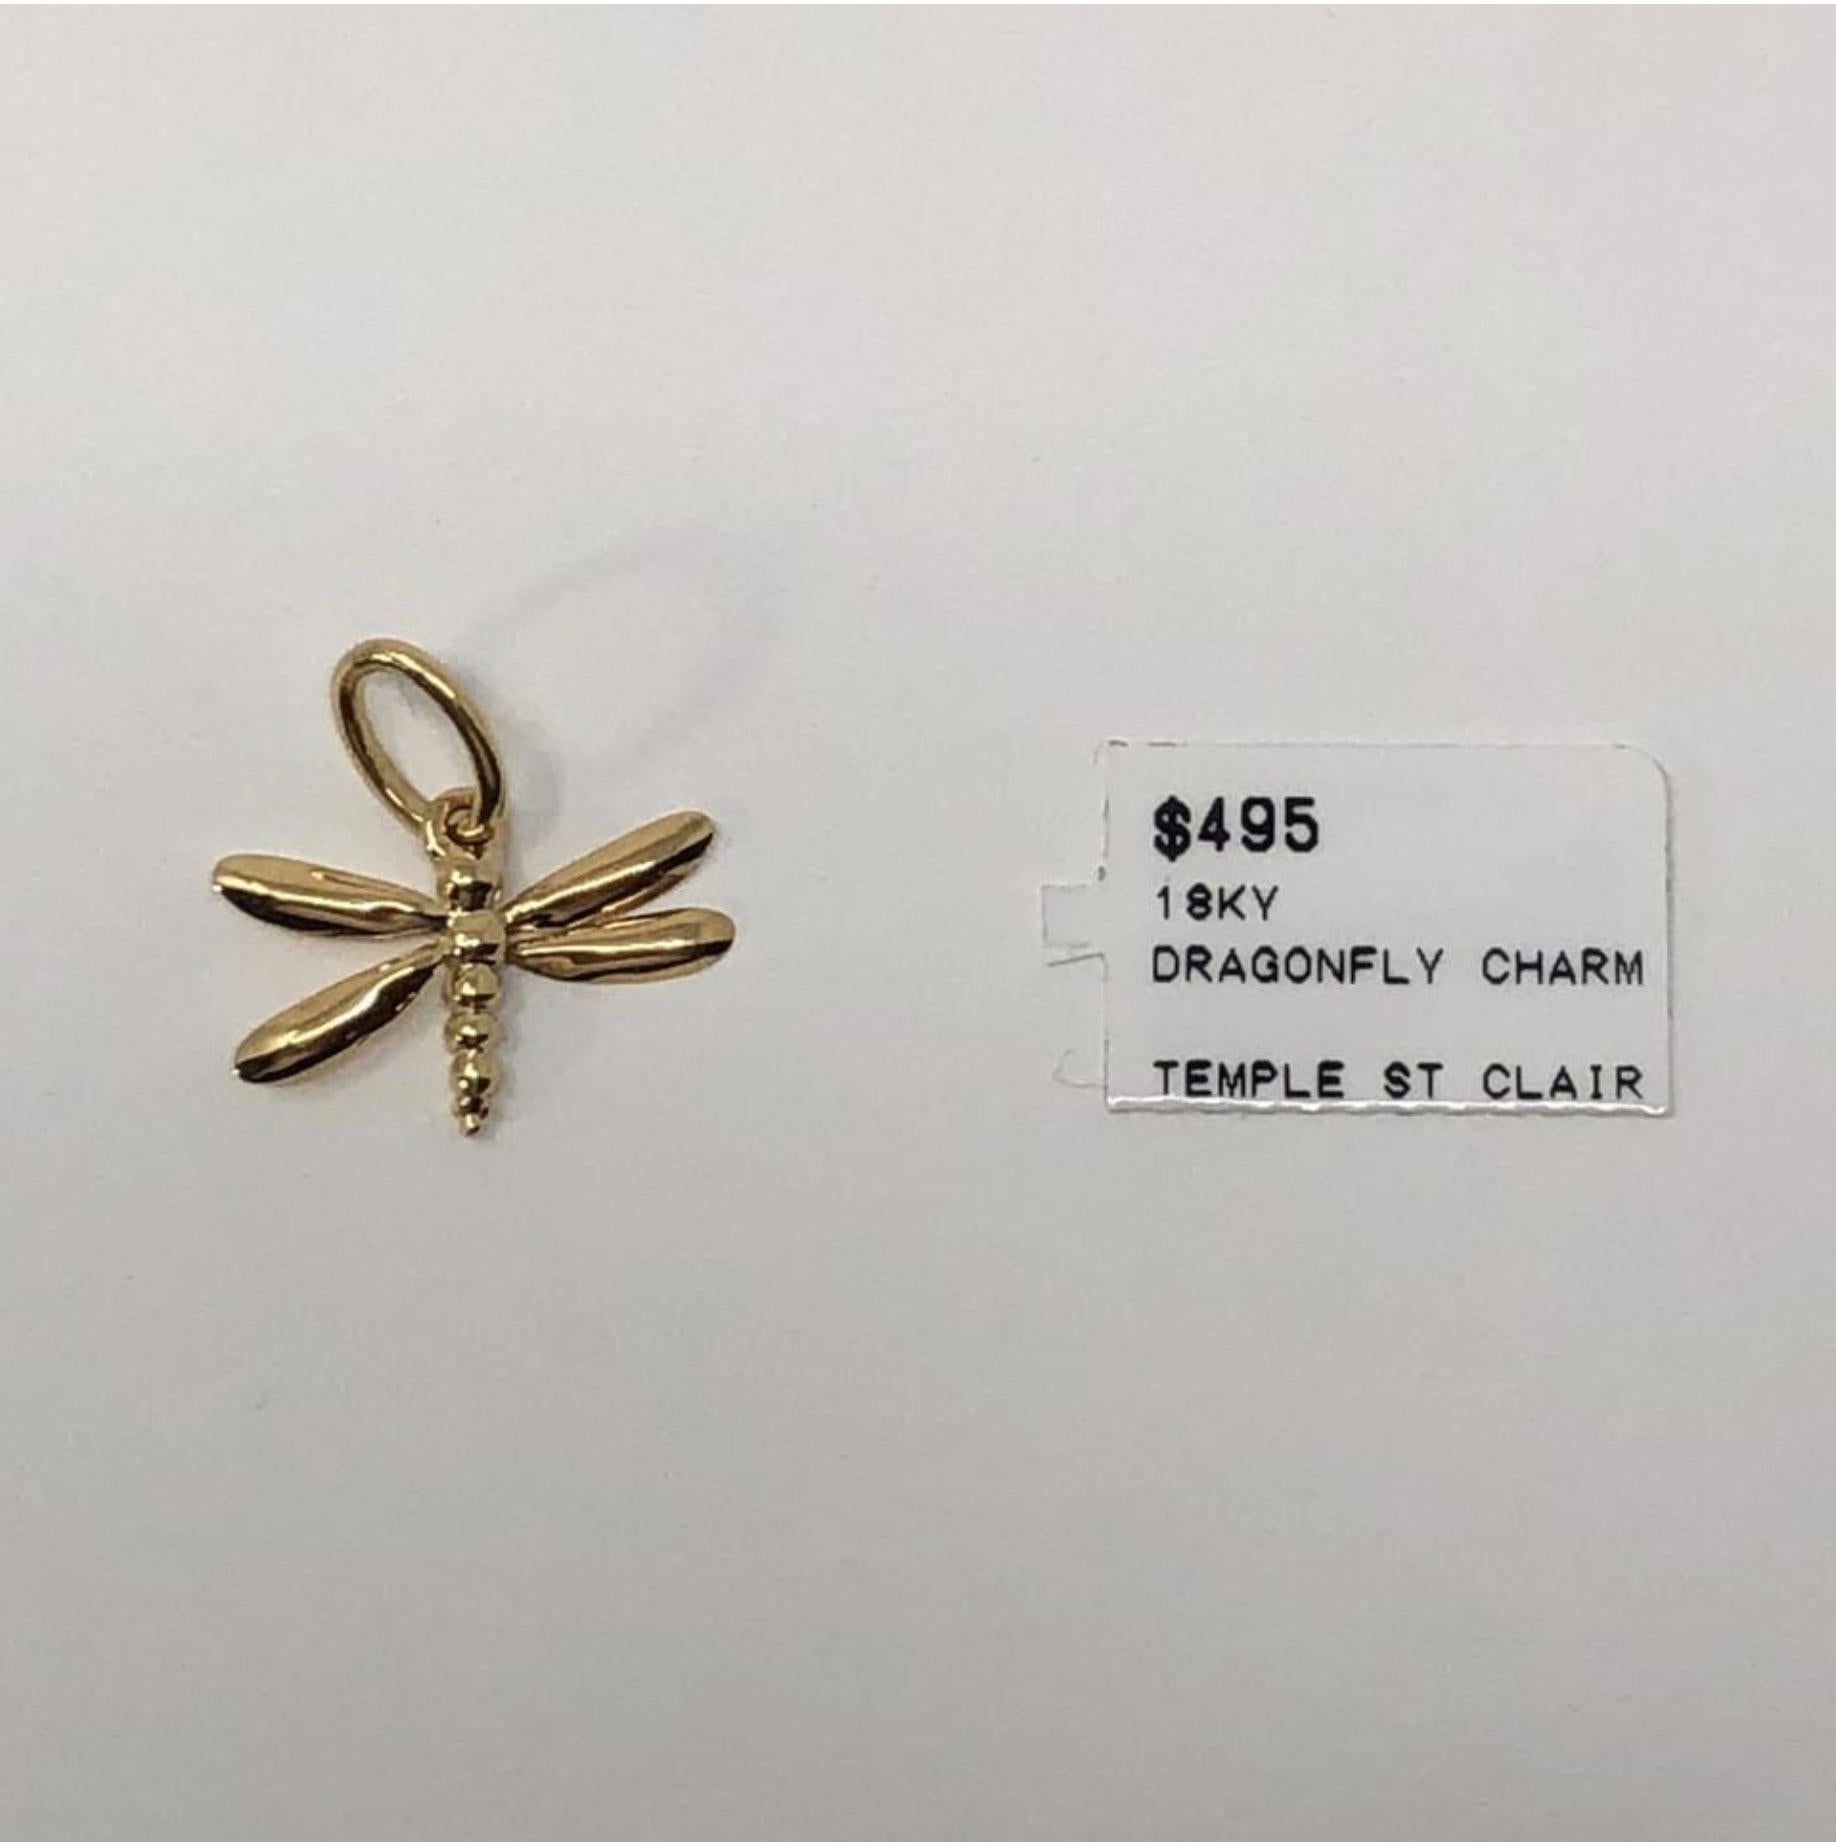 Temple St Clair 18 Karat Charm, Dragonfly For Sale 3